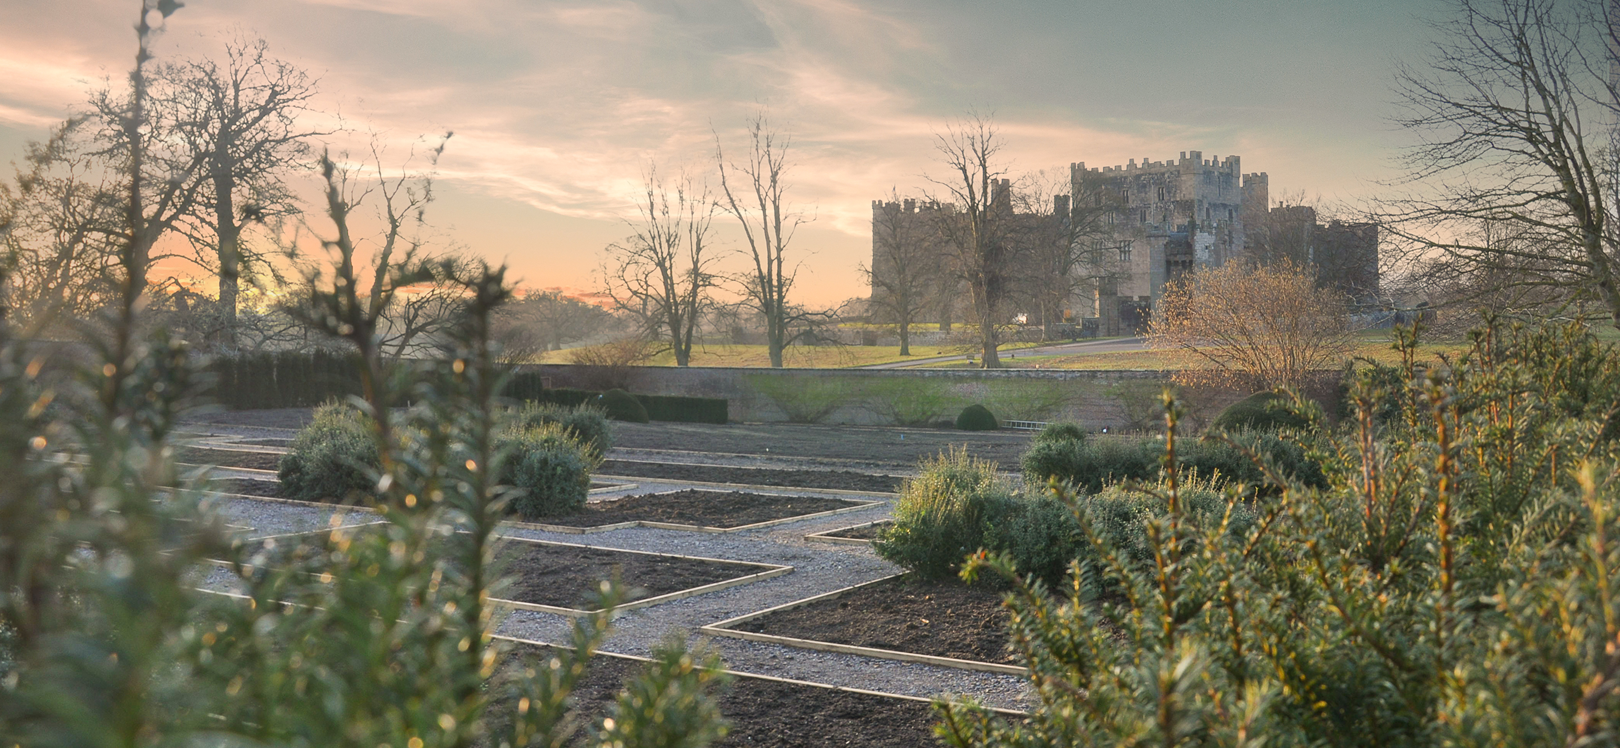 Image overlooks the wall garden and Raby Castle